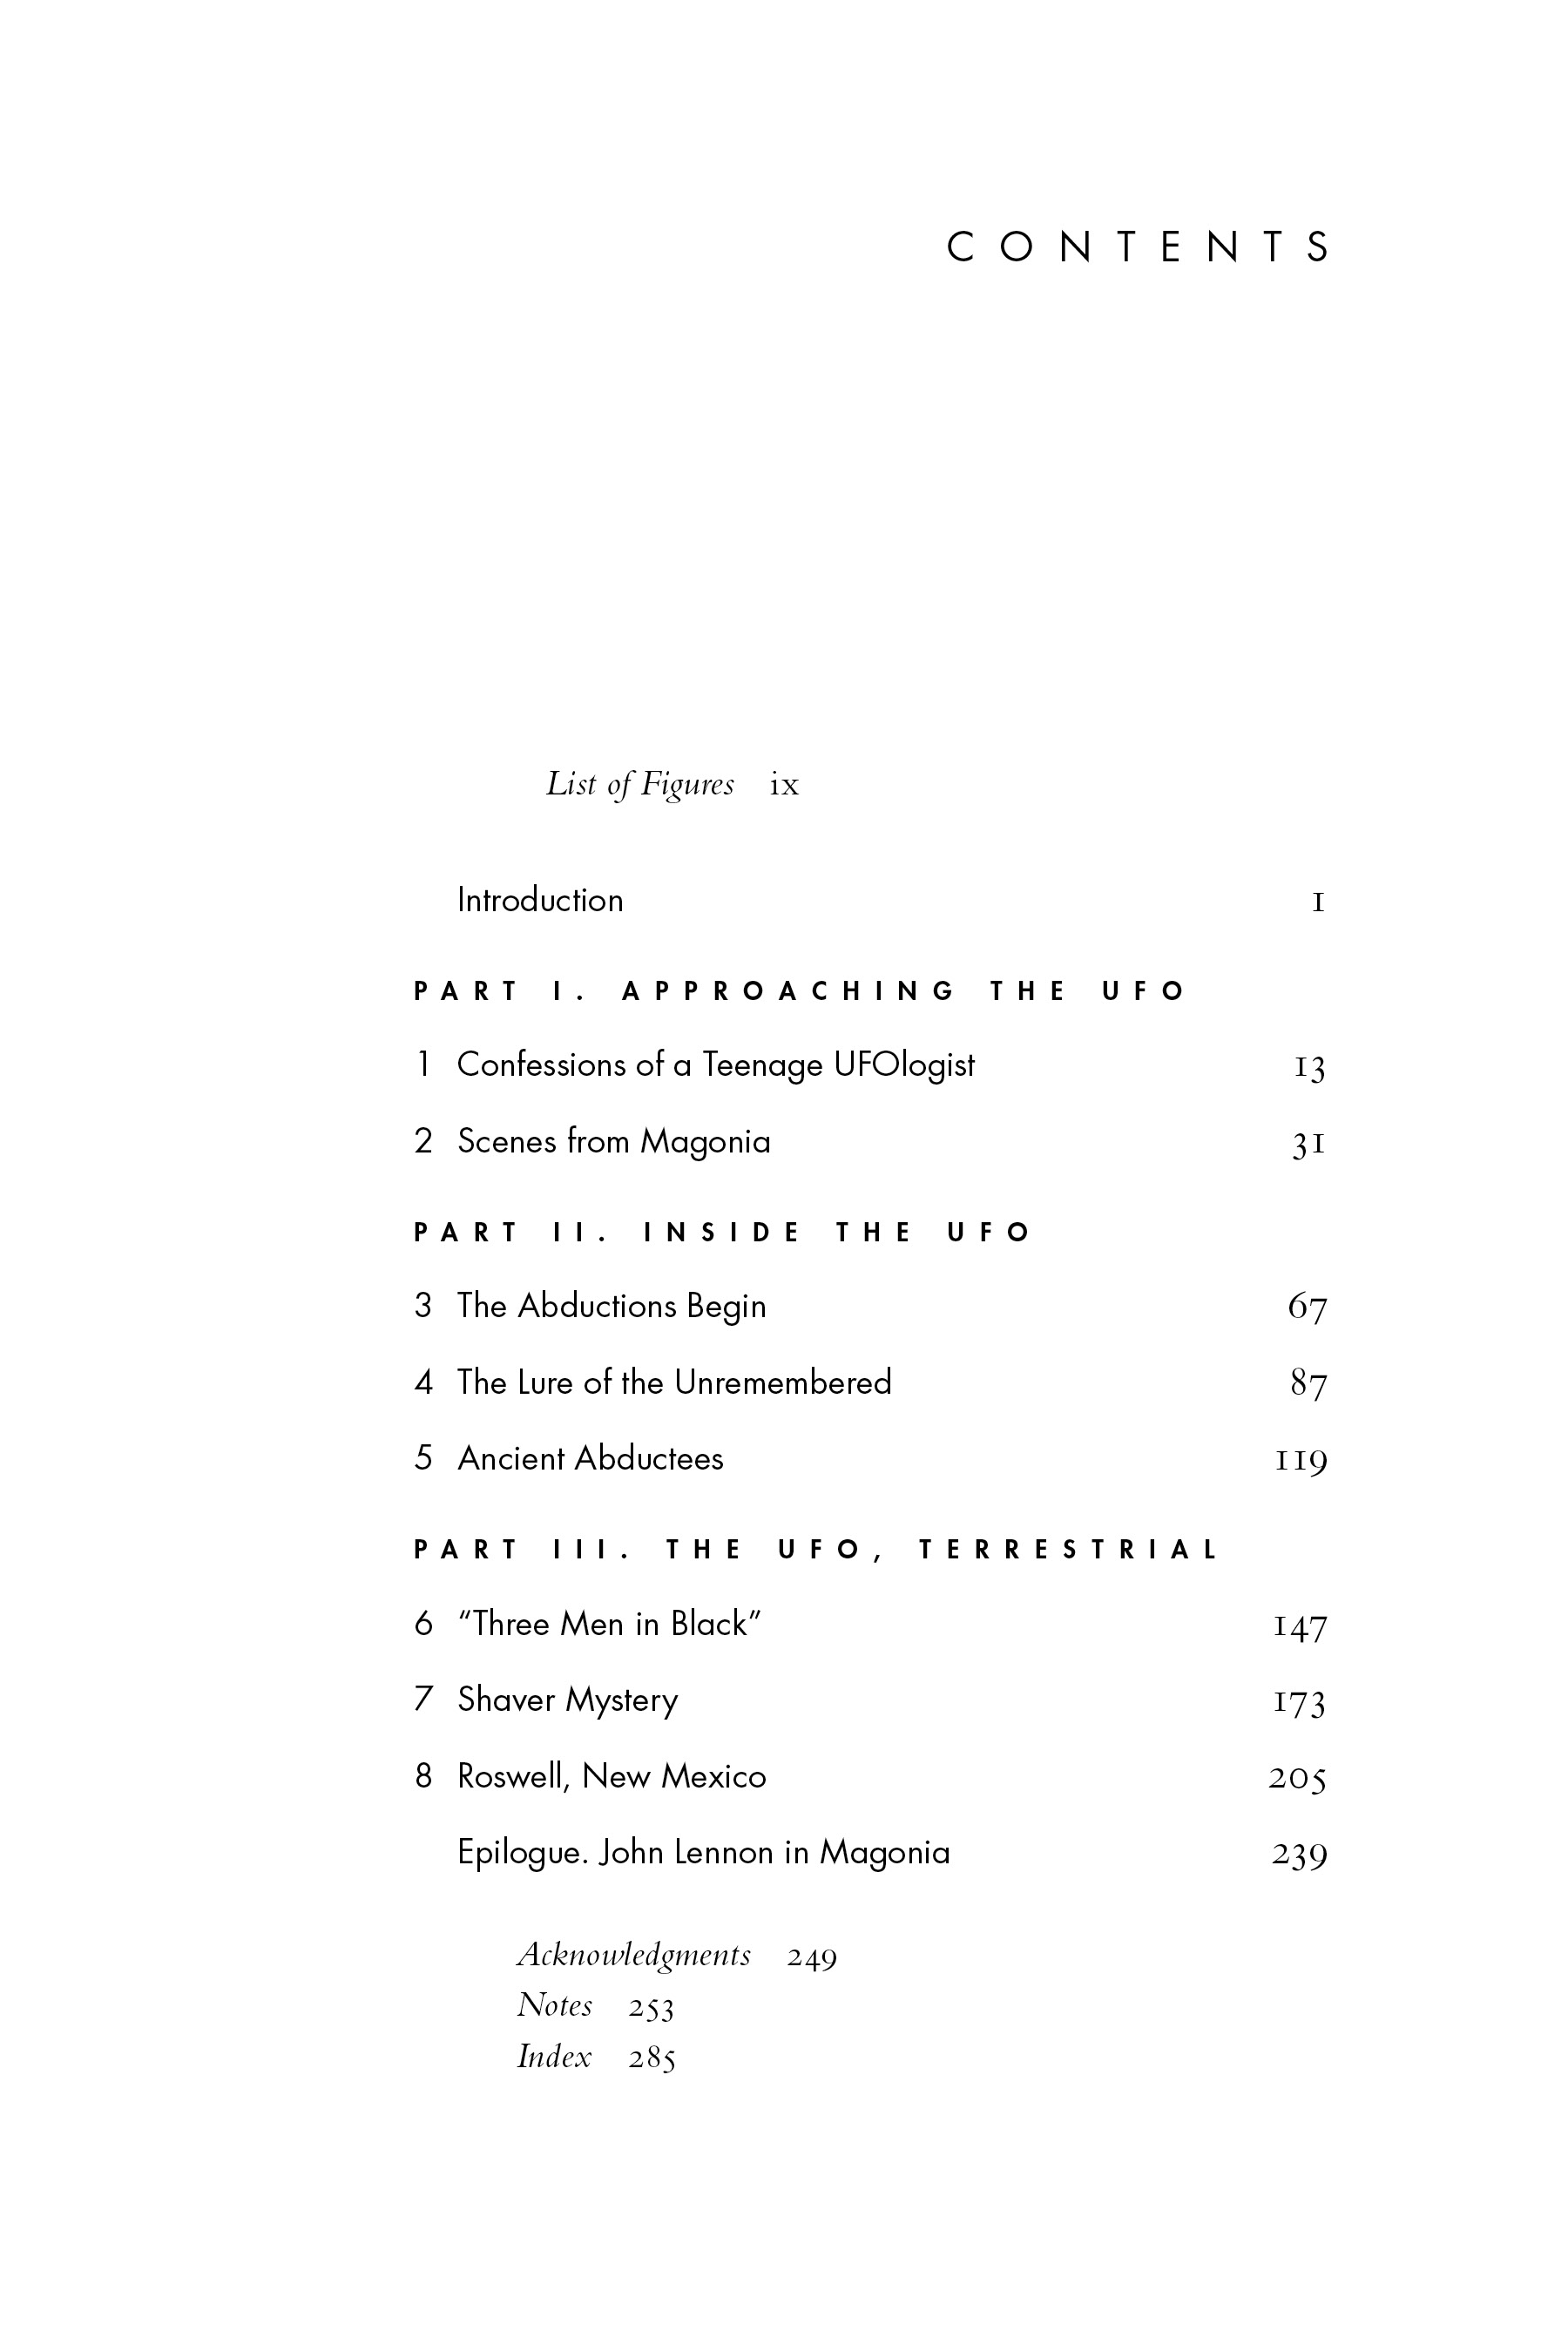 "Intimate Alien," Table of Contents.